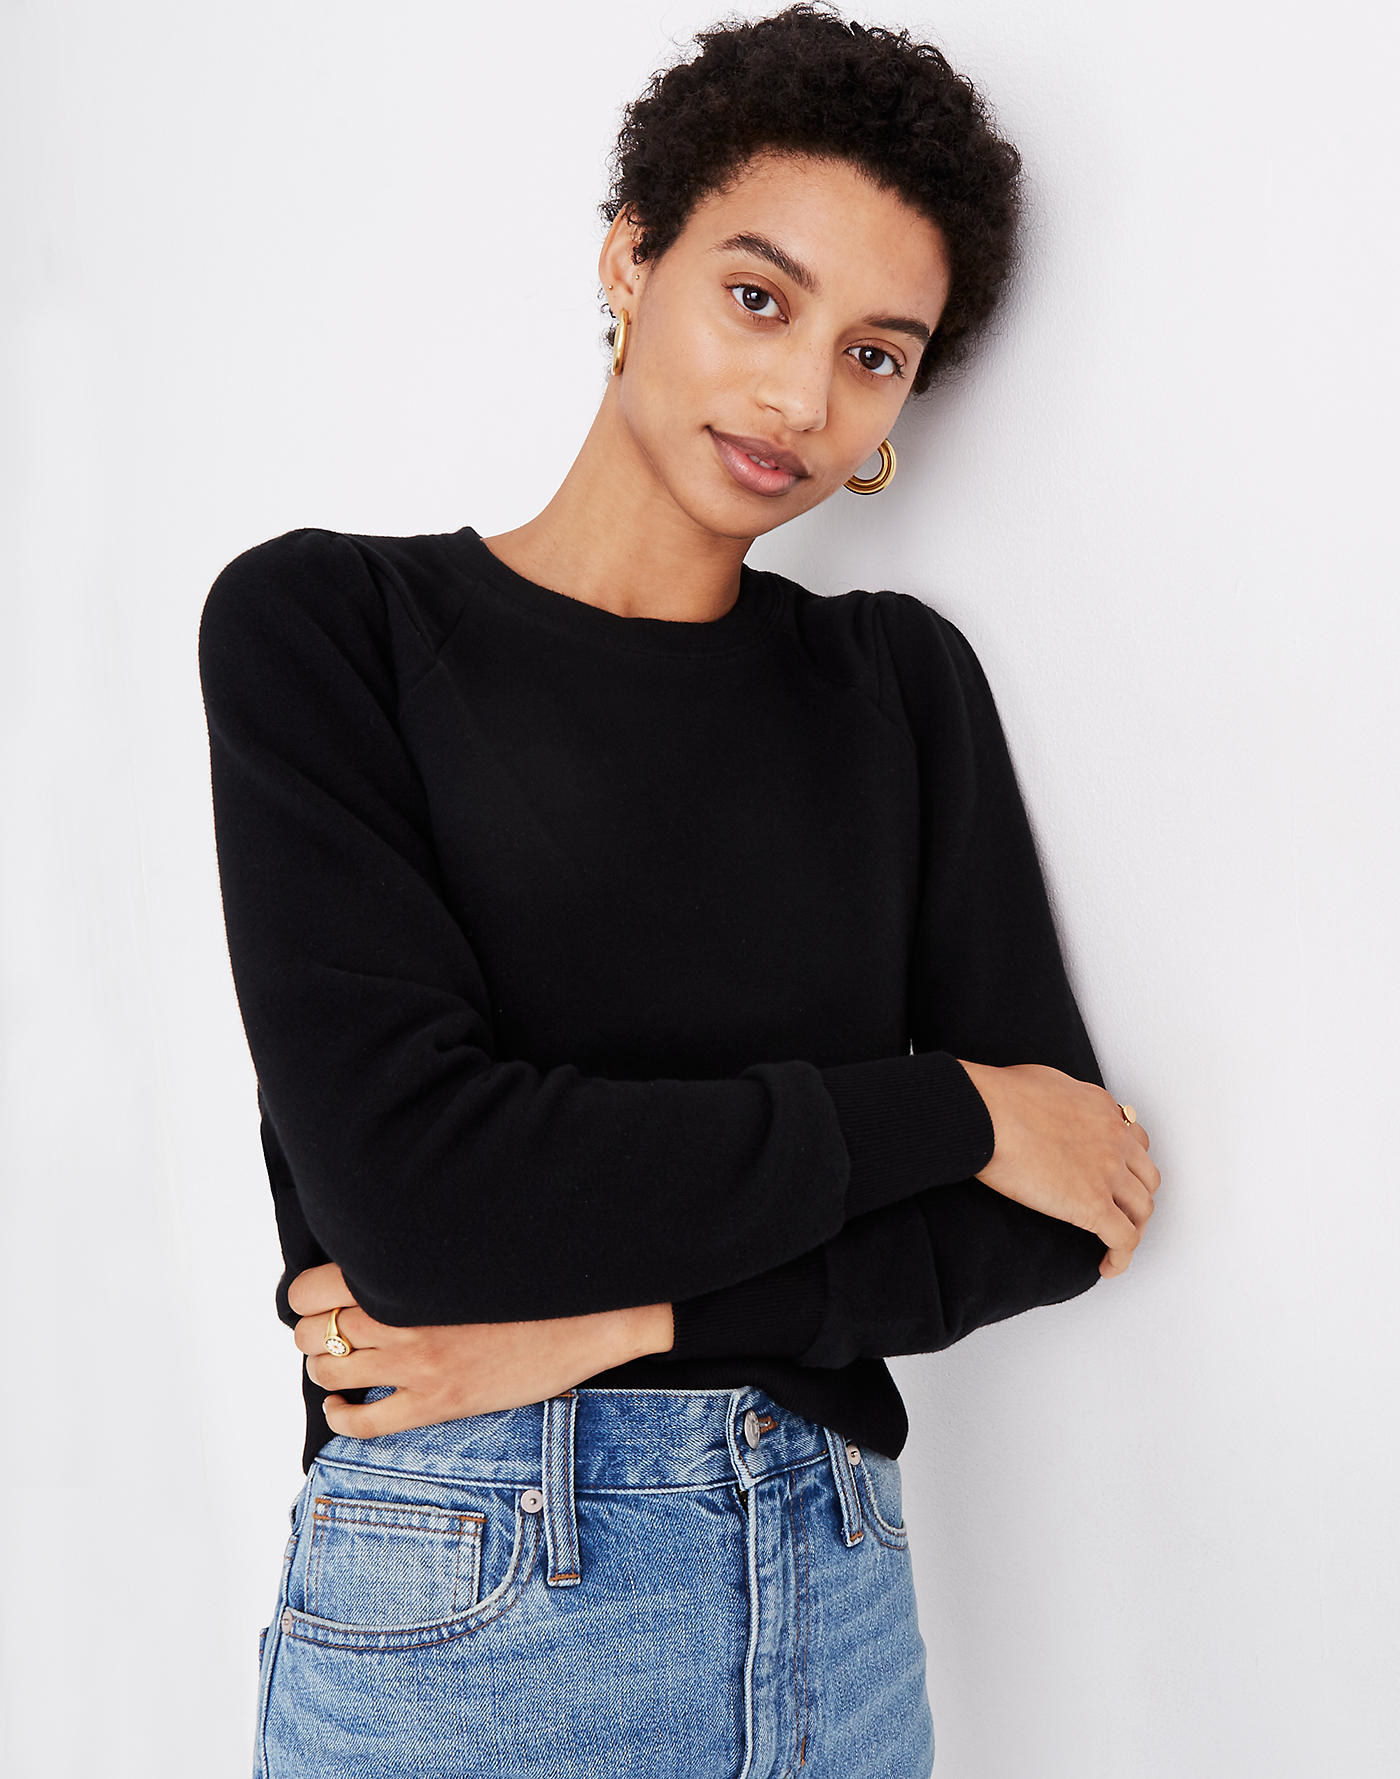 Madewell Is Giving An Extra 30% Off Their Sale Section So That's ...